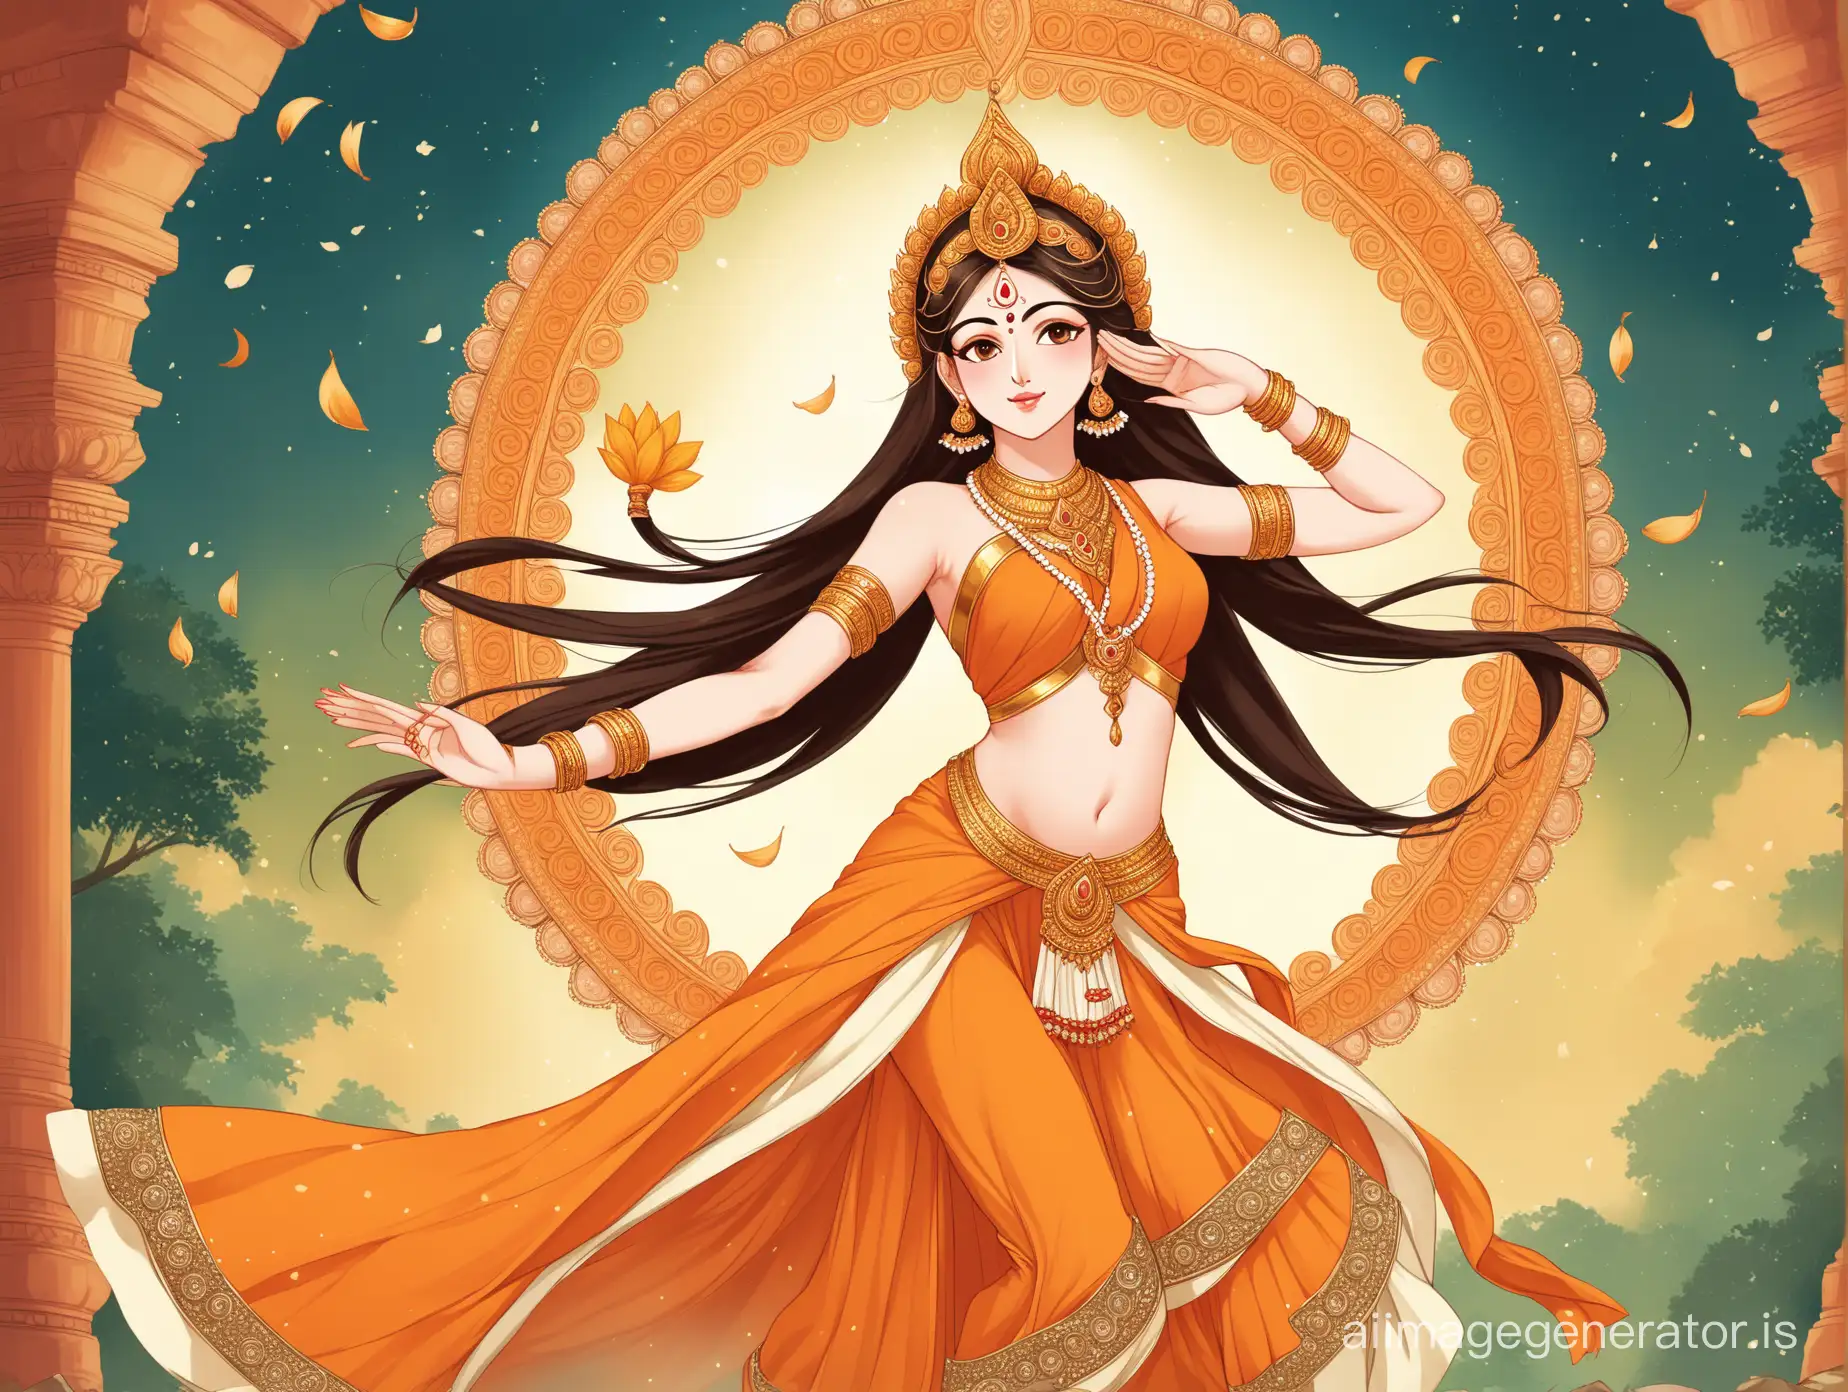 "Illustrate Goddess Sita's graceful sway as she dances in devotion to Lord Ram, embodying purity, devotion, and divine femininity."